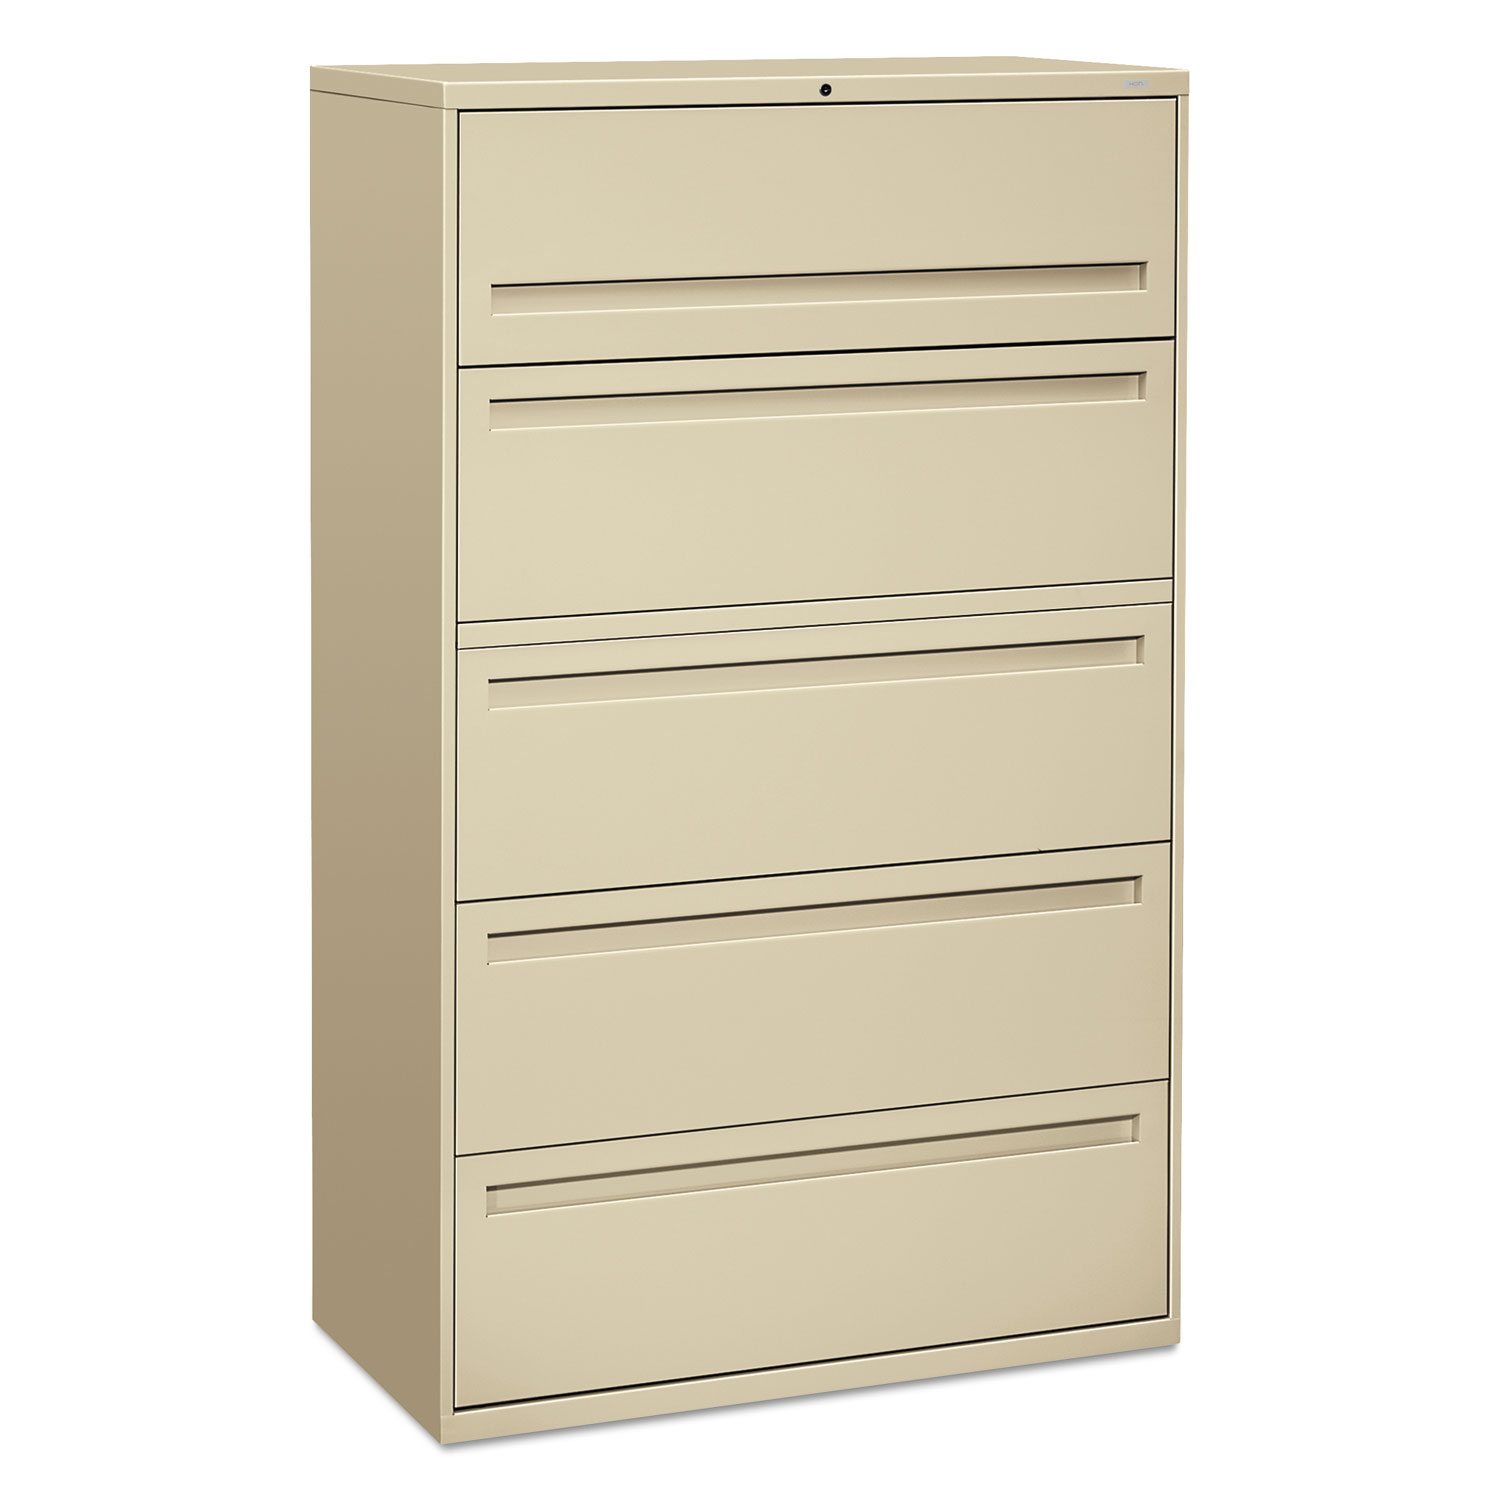 700 Series Five-Drawer Lateral File w/Roll-Out Shelves, 42w x 18d x 64 1/4h, Putty